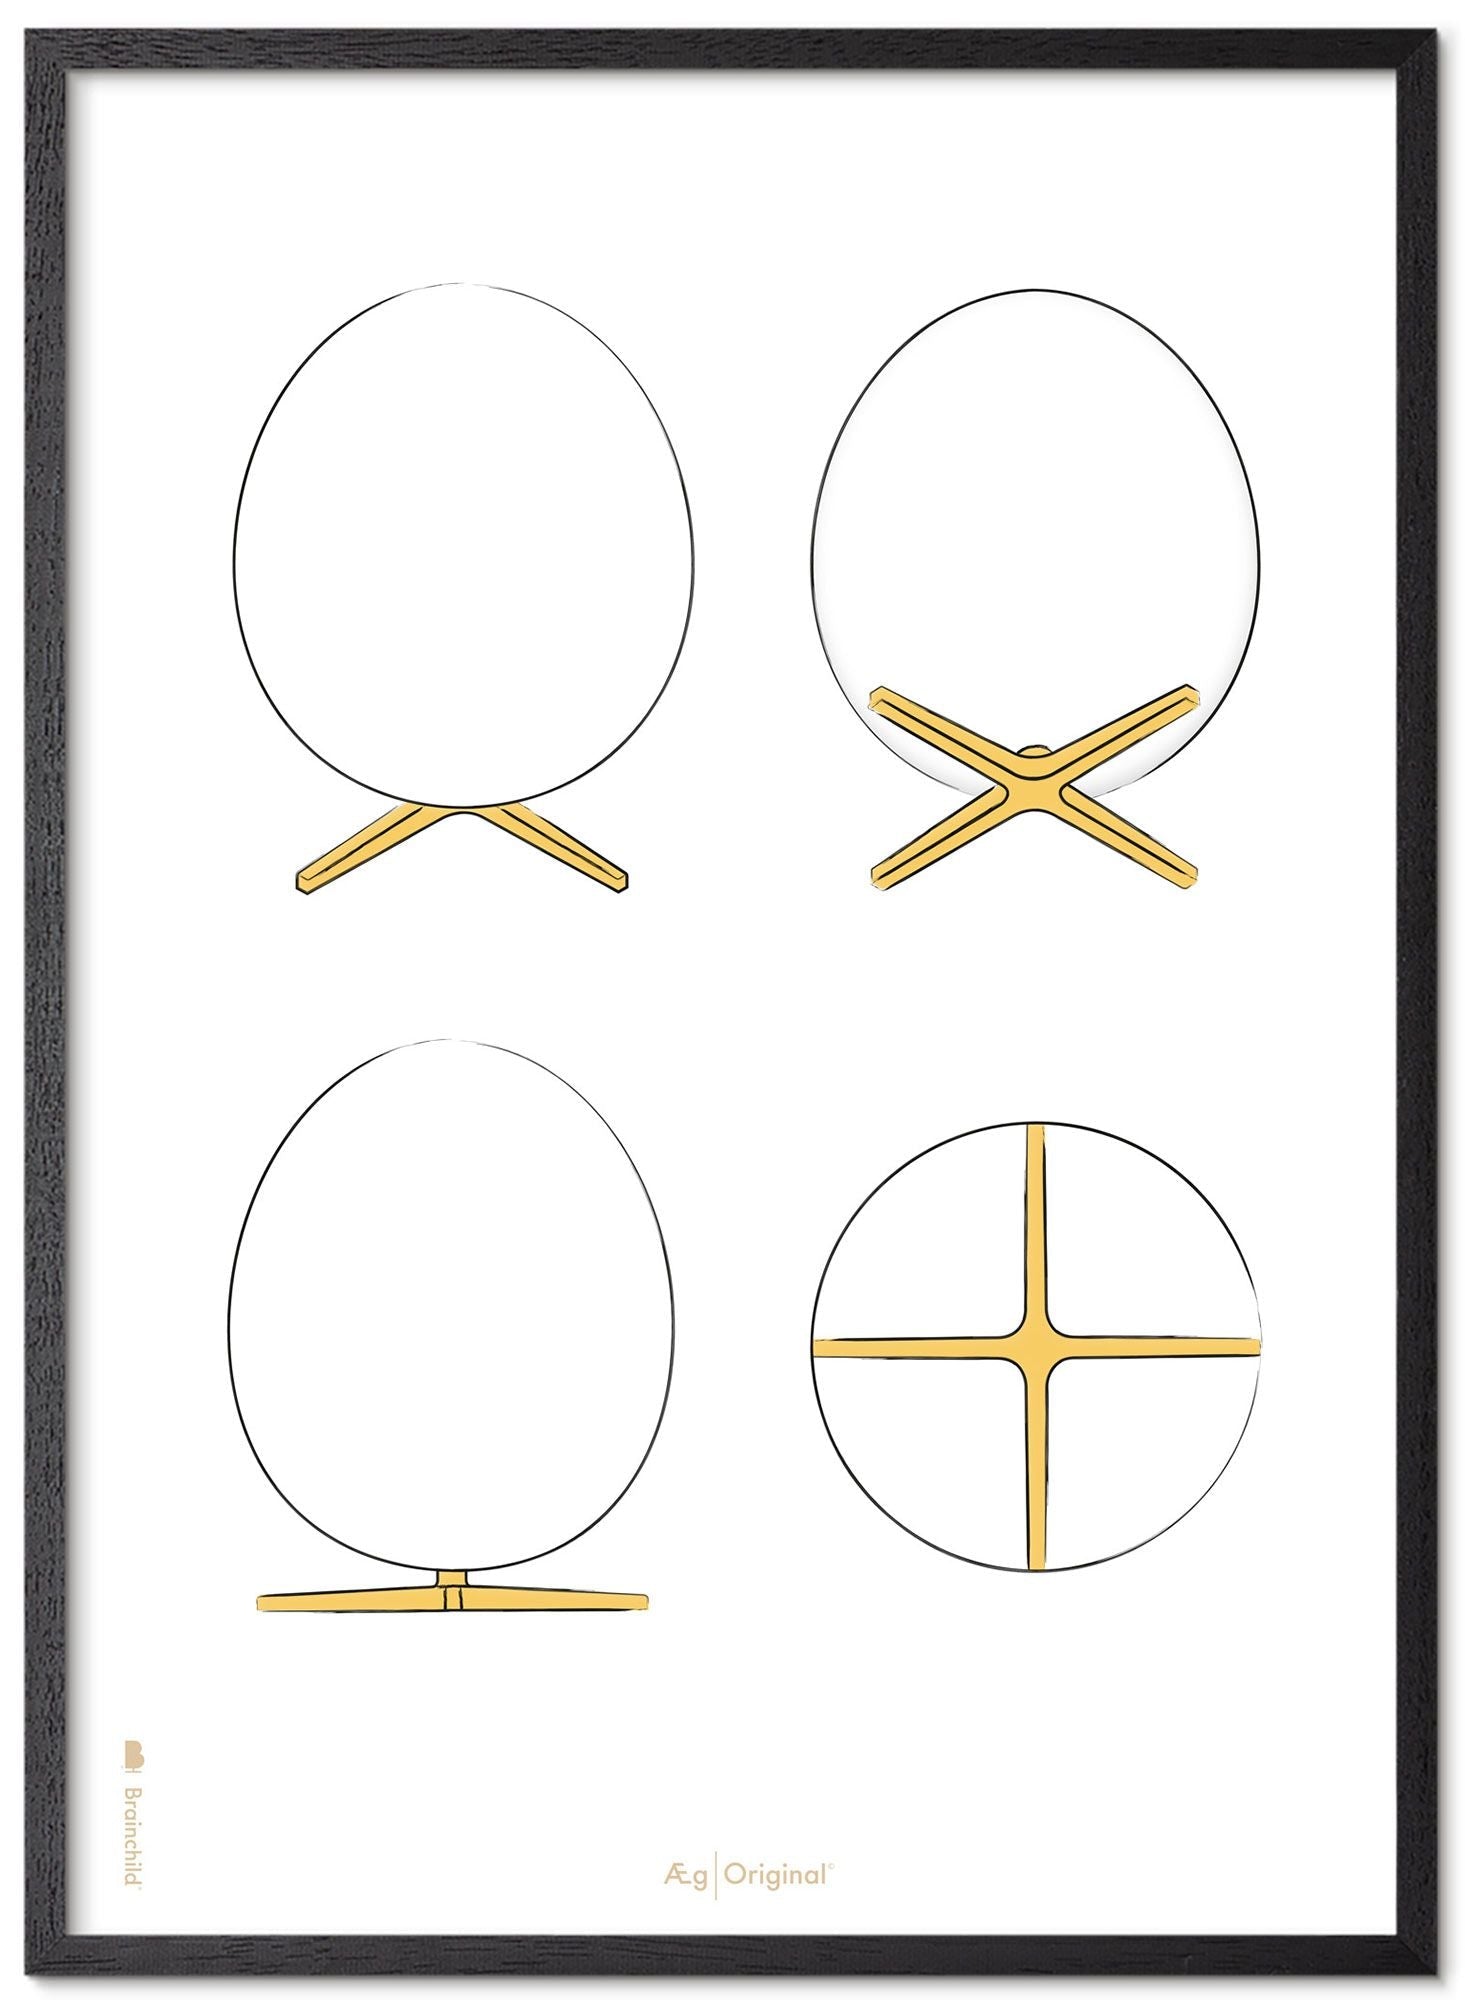 Brainchild The Egg Design Sketches Poster Frame Made Of Black Lacquered Wood 50x70 Cm, White Background